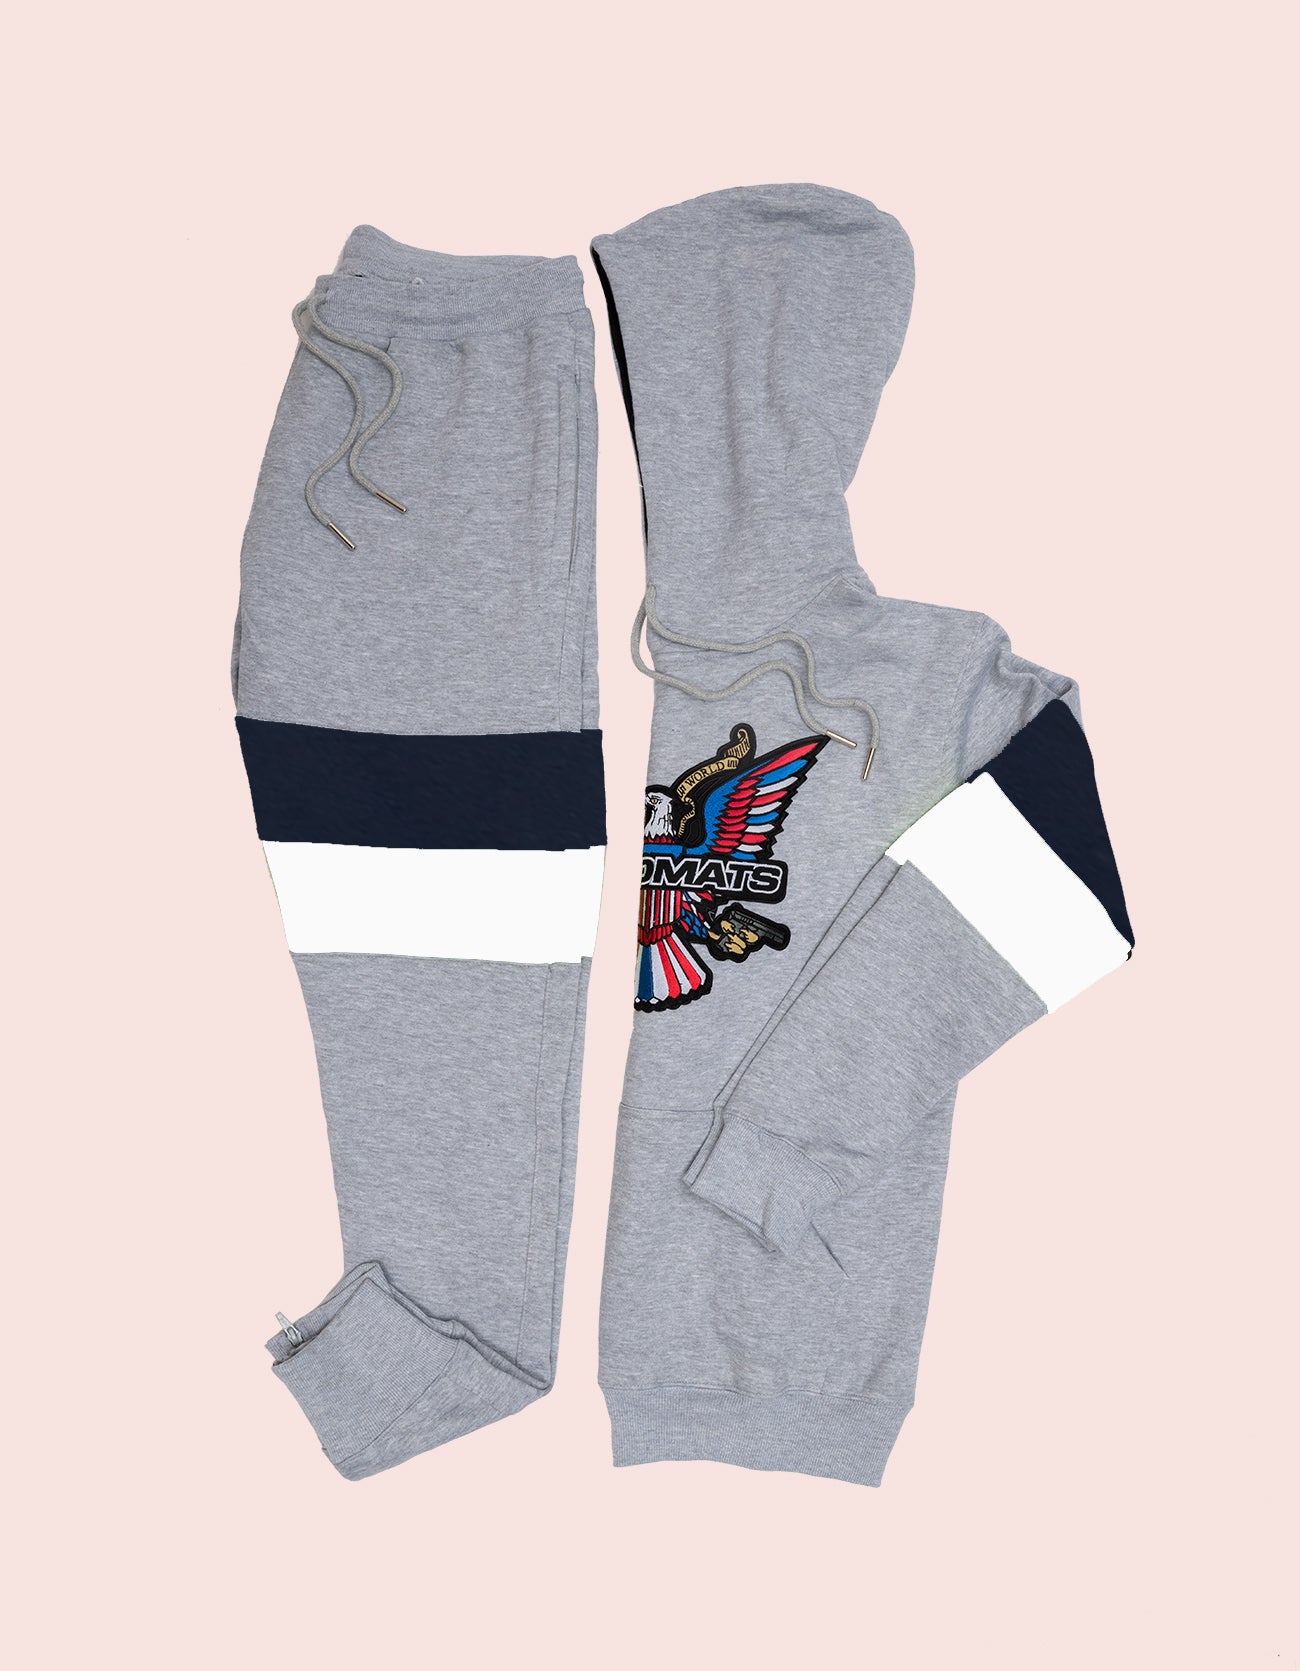 Dipset Couture Grey/Navy/White Sweatsuit